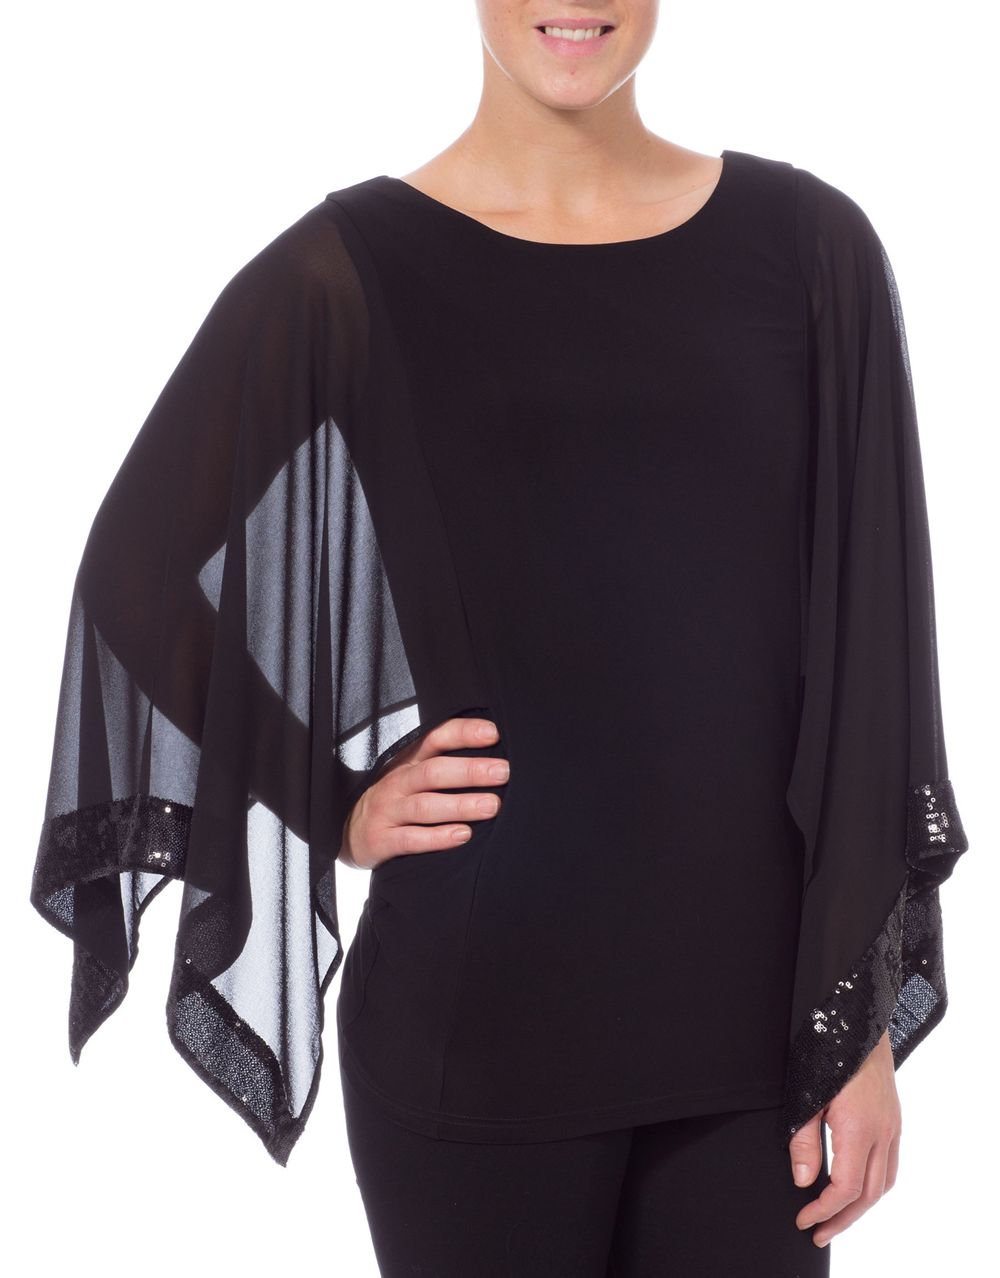 Sequin Trim Chiffon And Jersey Top